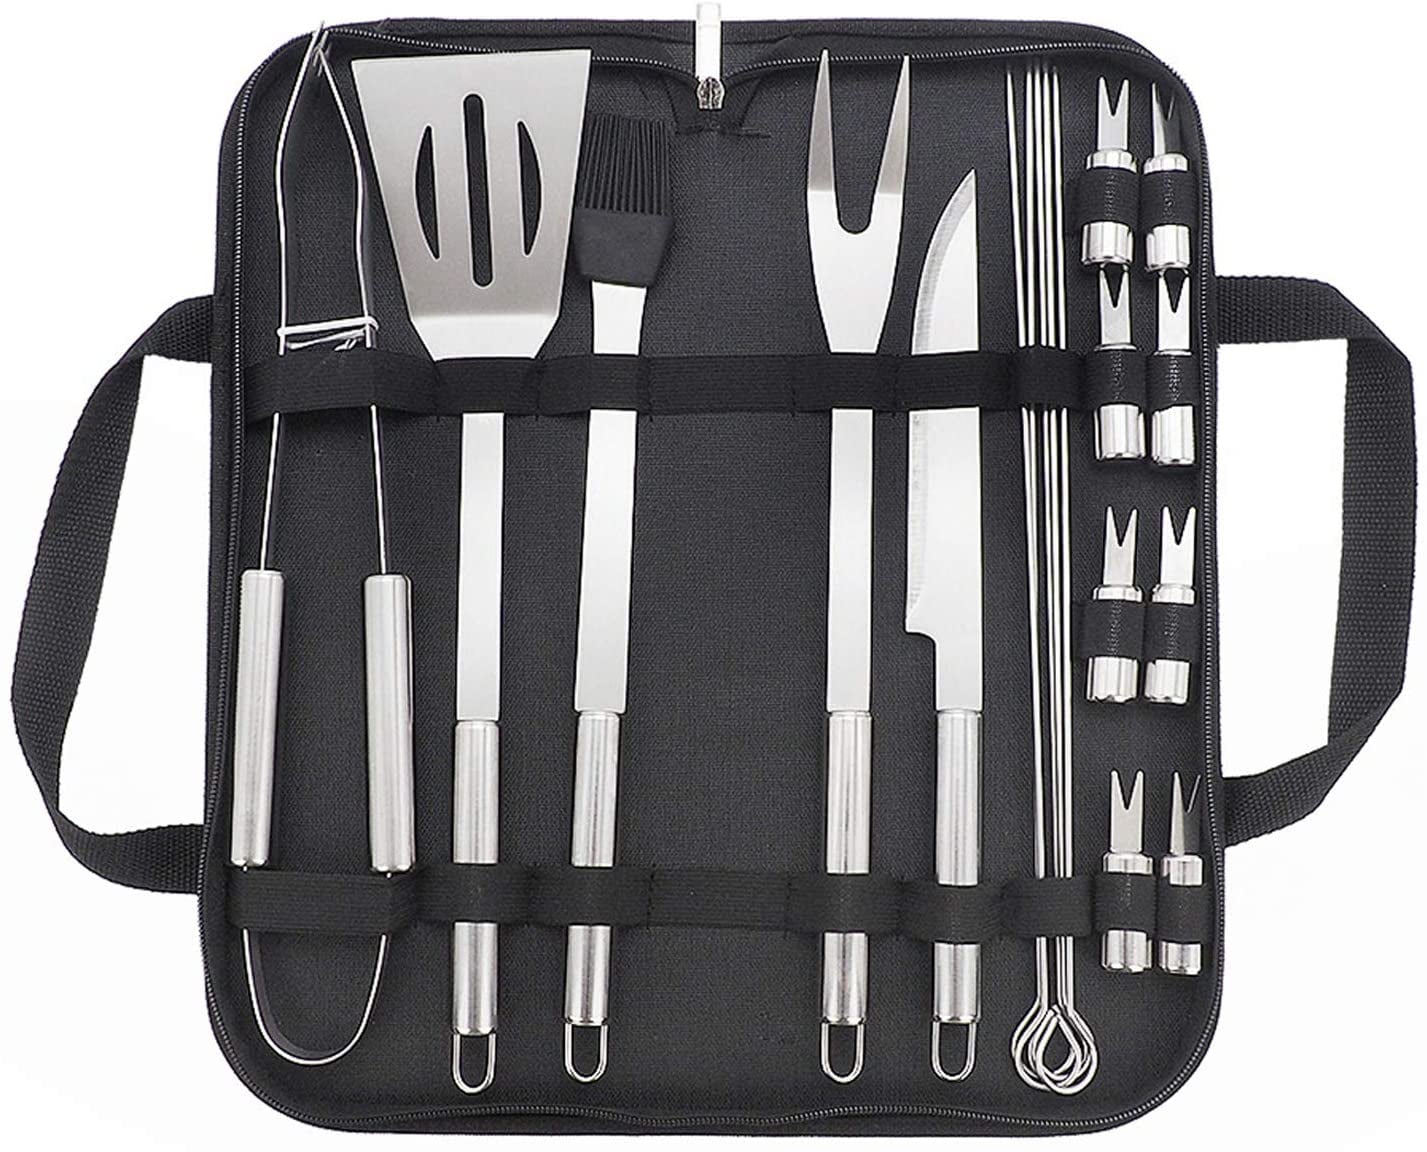 Stainless Steel Grilling Utensil Set, BBQ Accessories Tool Set with ...